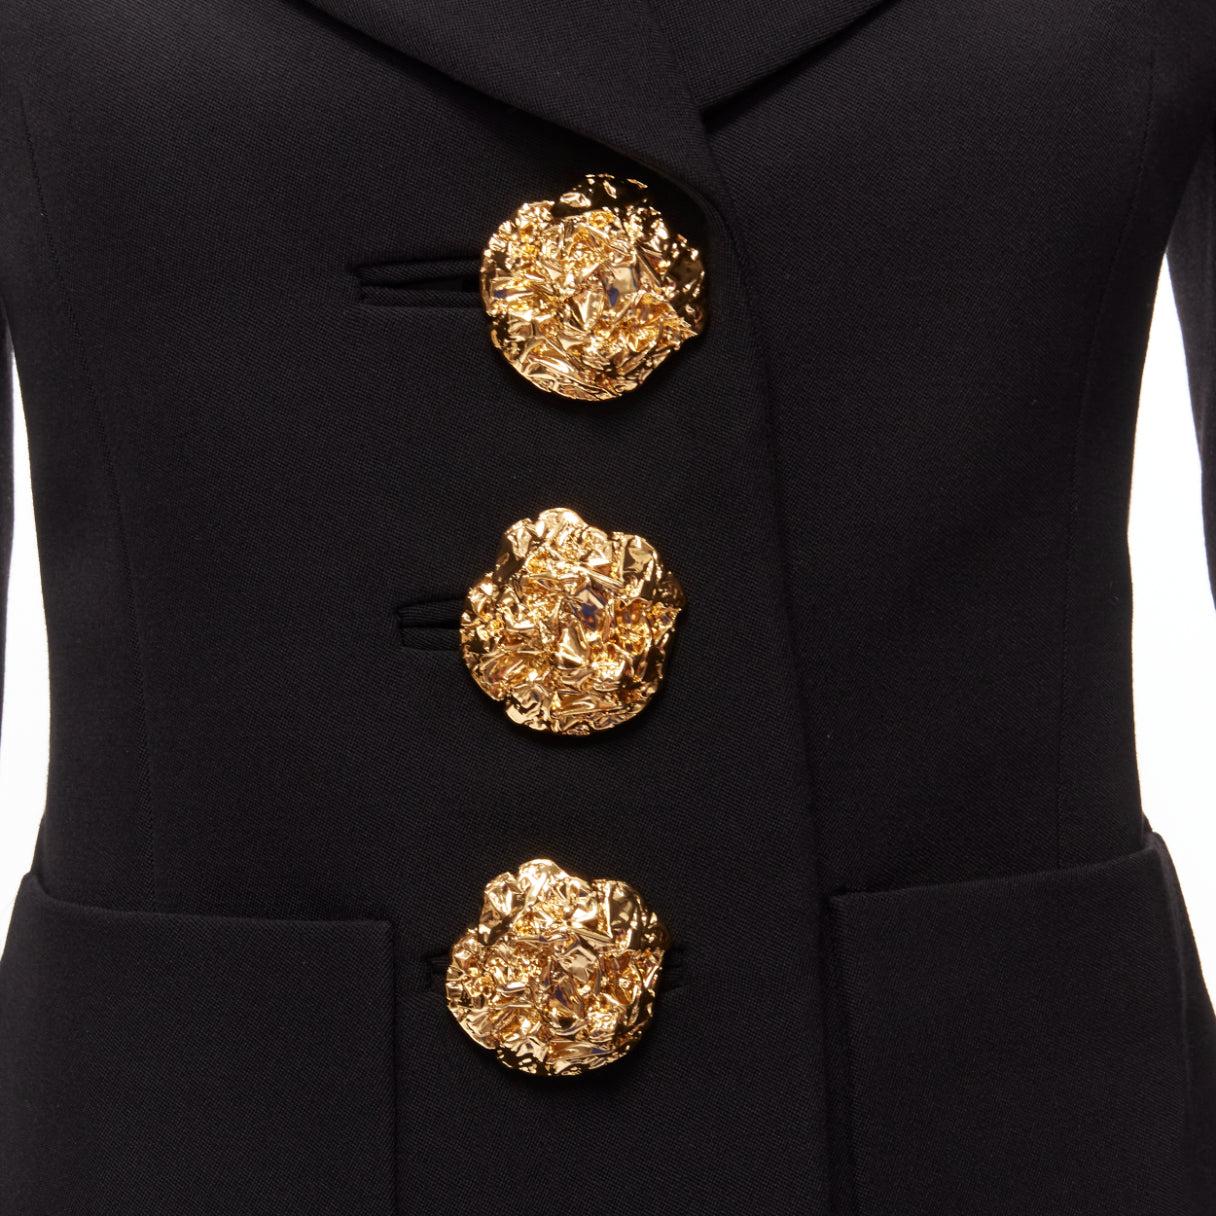 SAINT LAURENT 2022 black wool gold big floral buttons 80s power shoulder blazer FR34 XS
Reference: AAWC/A00517
Brand: Saint Laurent
Designer: Anthony Vaccarello
Collection: 2022
Material: Wool
Color: Black, Gold
Pattern: Solid
Closure: